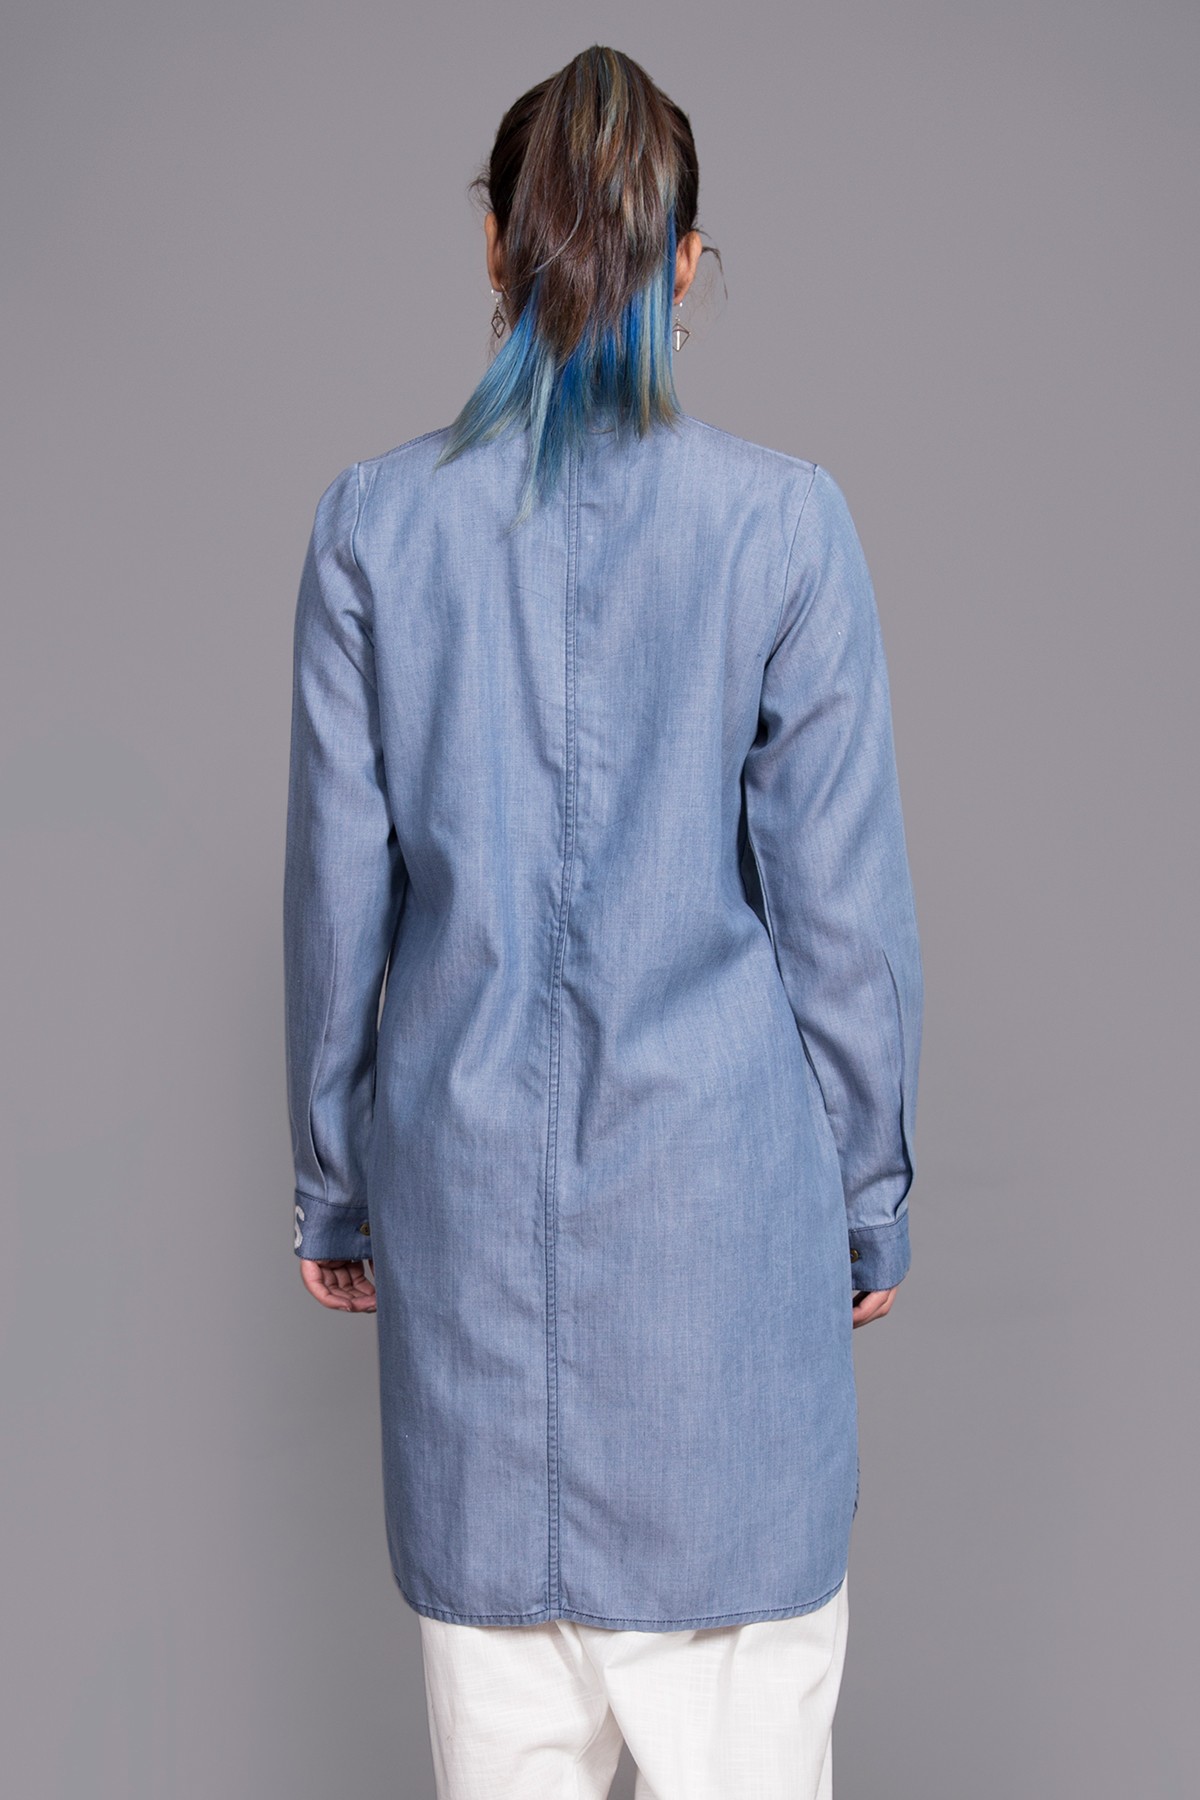 Blue denim blitz badge tunic by Generation collection 2019 online